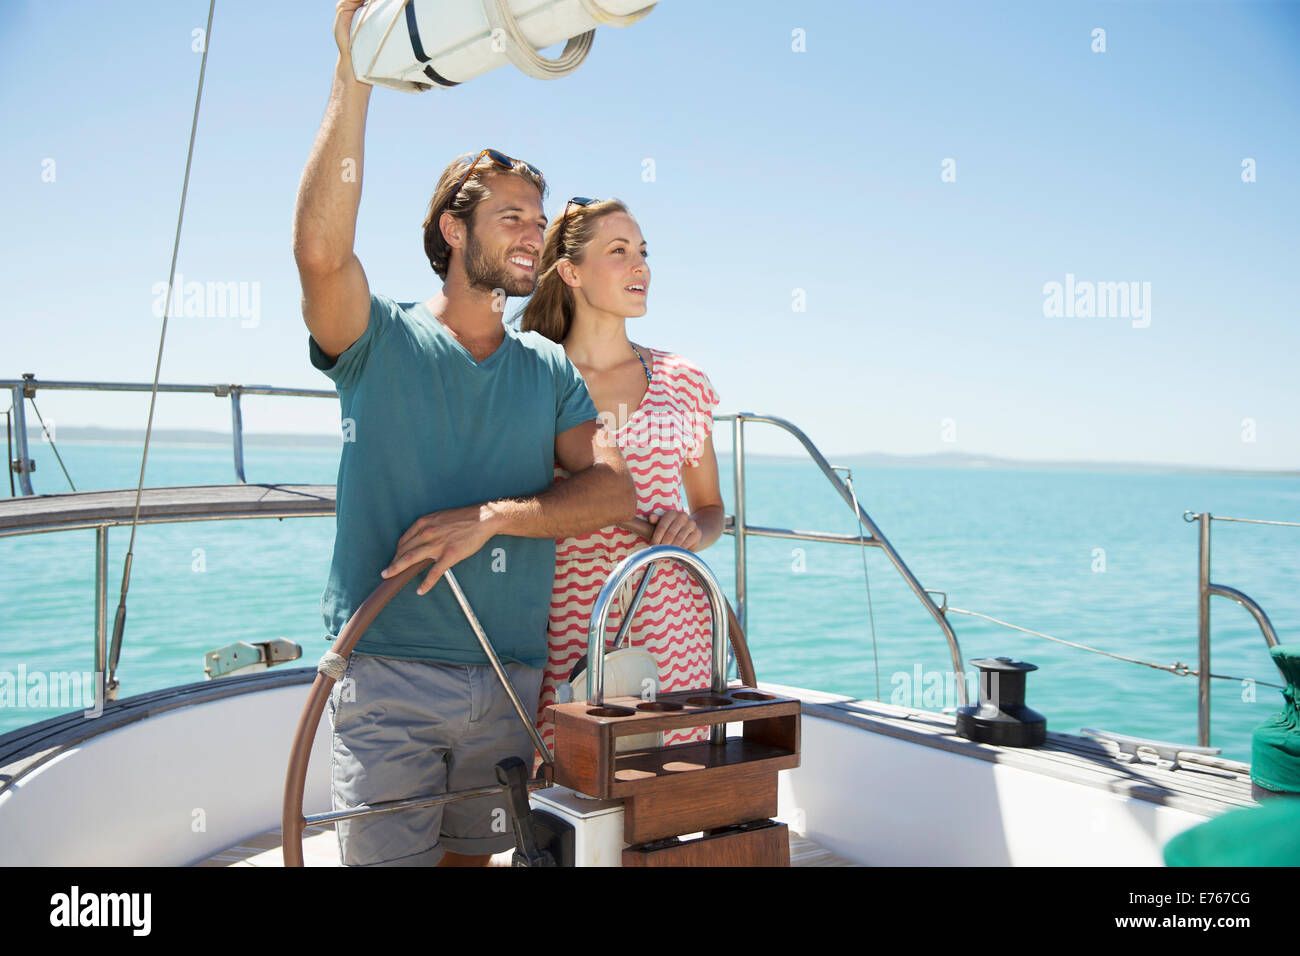 Couple steering boat together Stock Photo